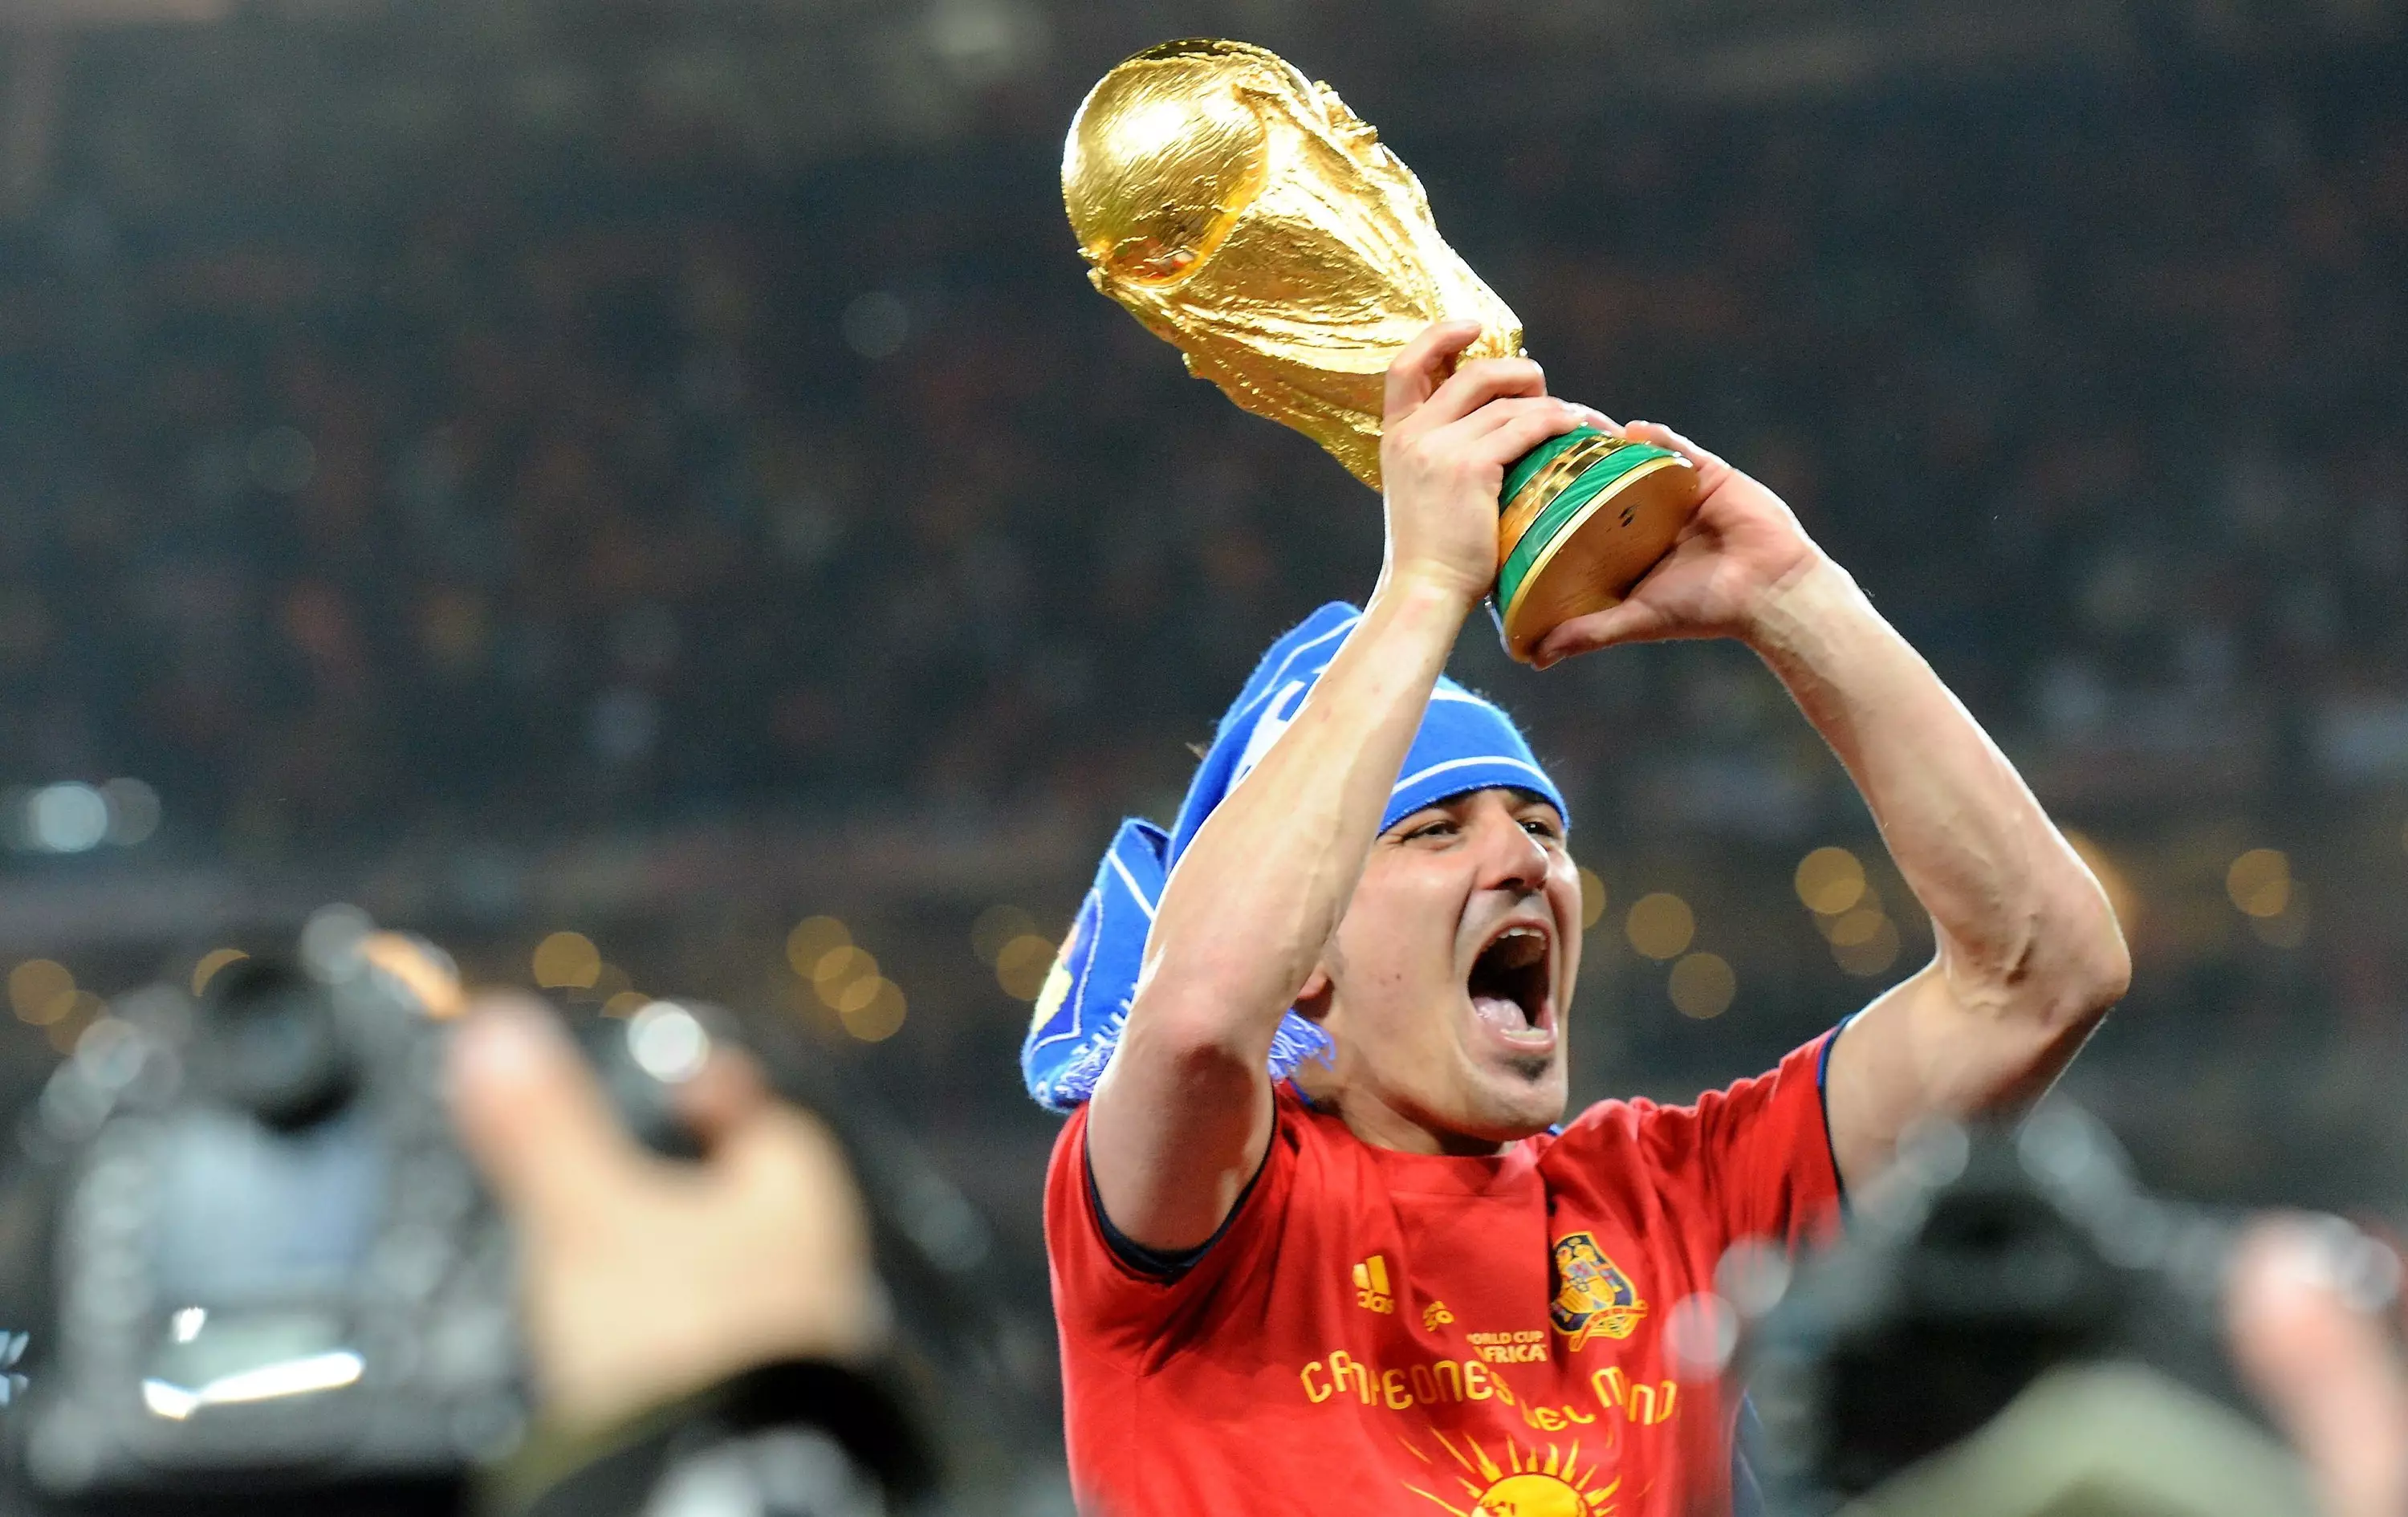 Villa reaches the pinnacle by winning the World Cup. Image: PA Images